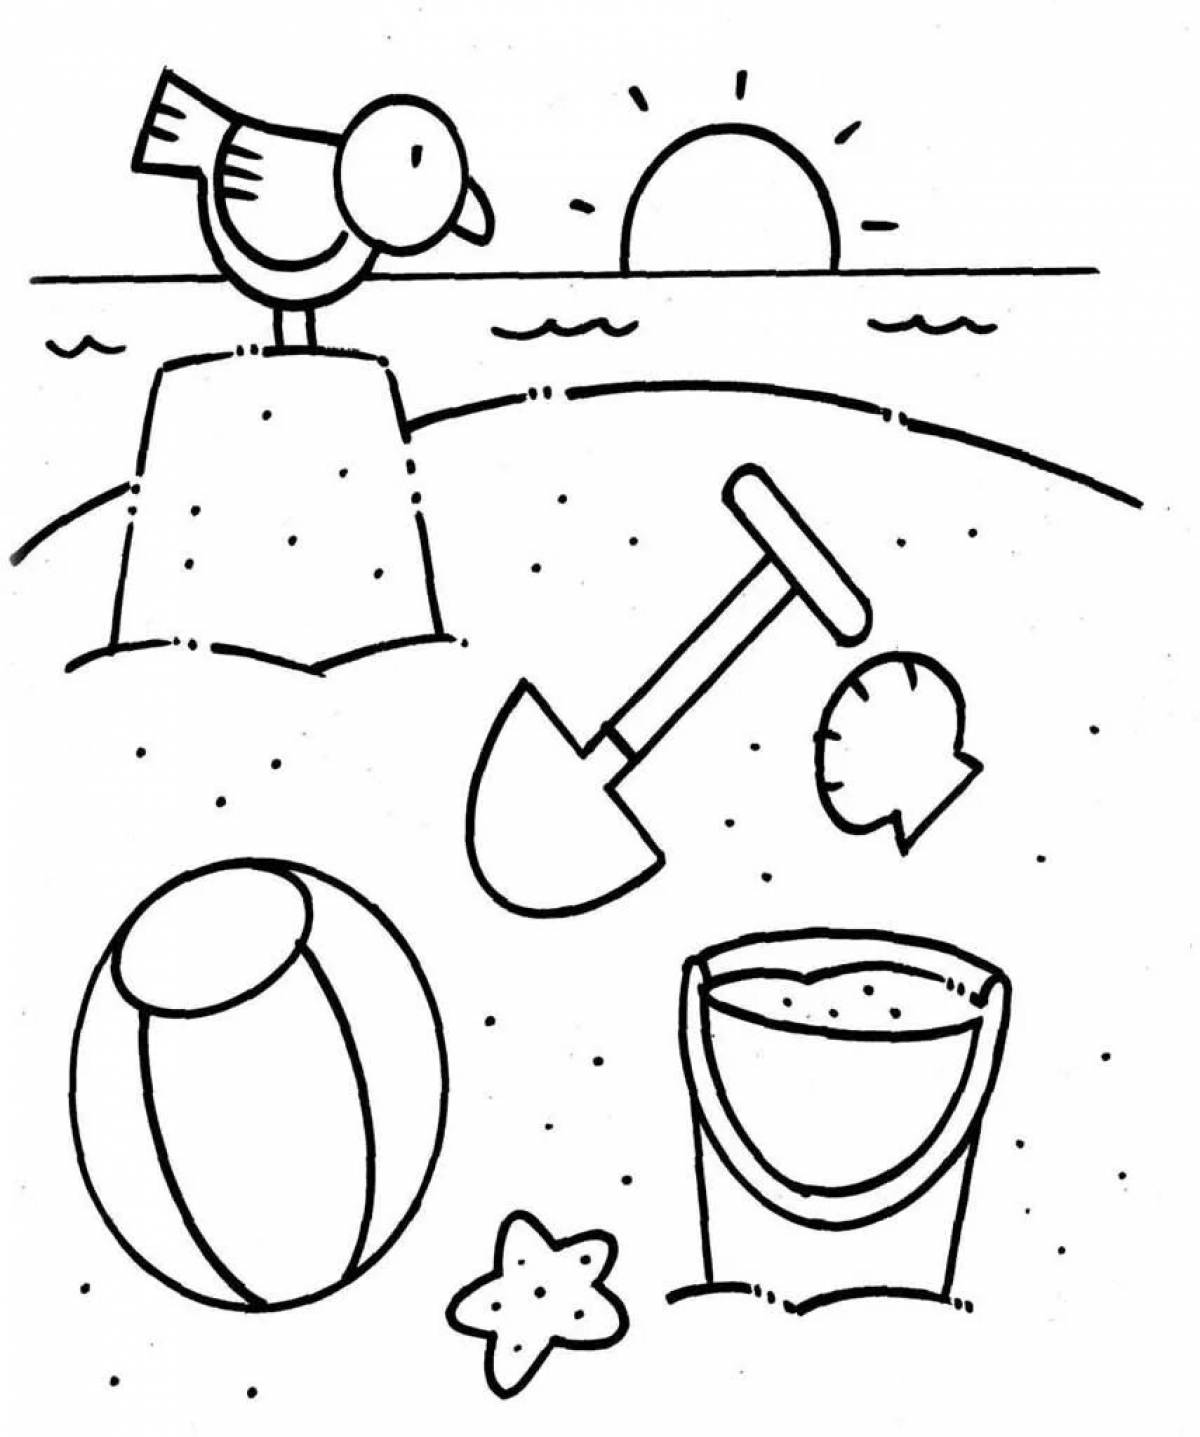 Uplifting sand game coloring page